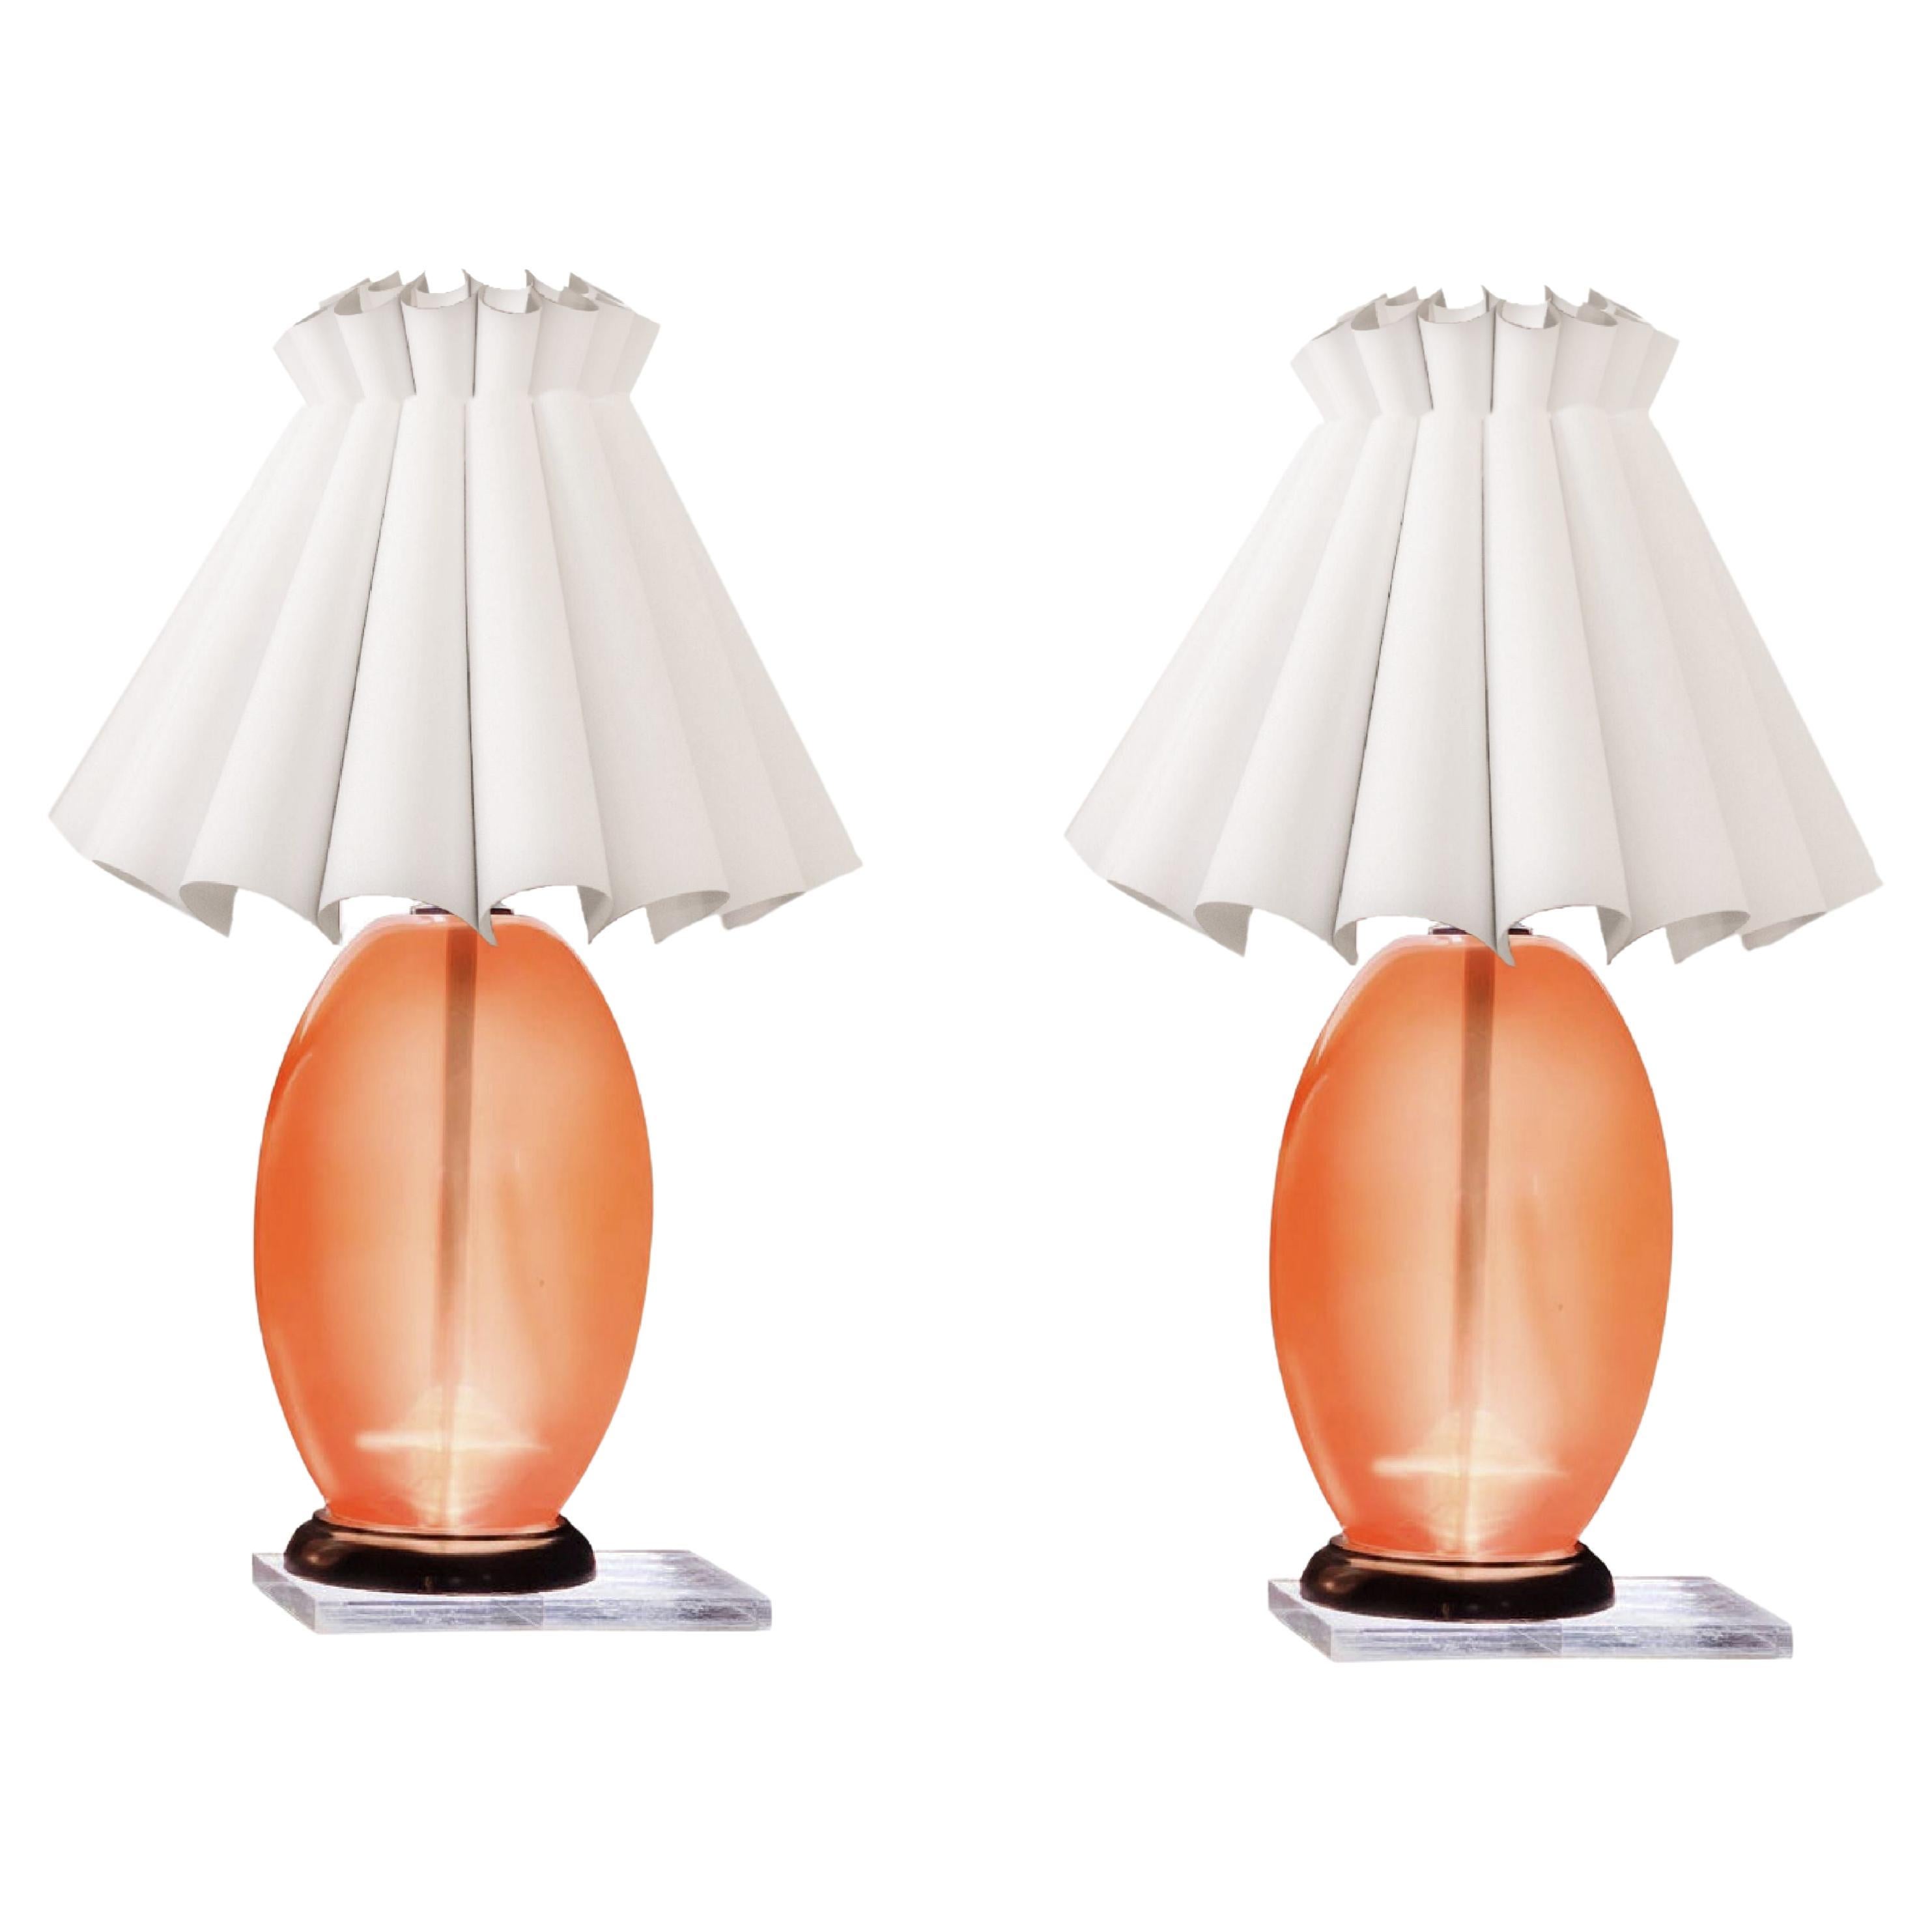 Modern Peach Lucite Midcentury Monumental  Sculptural Egg Form Table Lamp For Sale